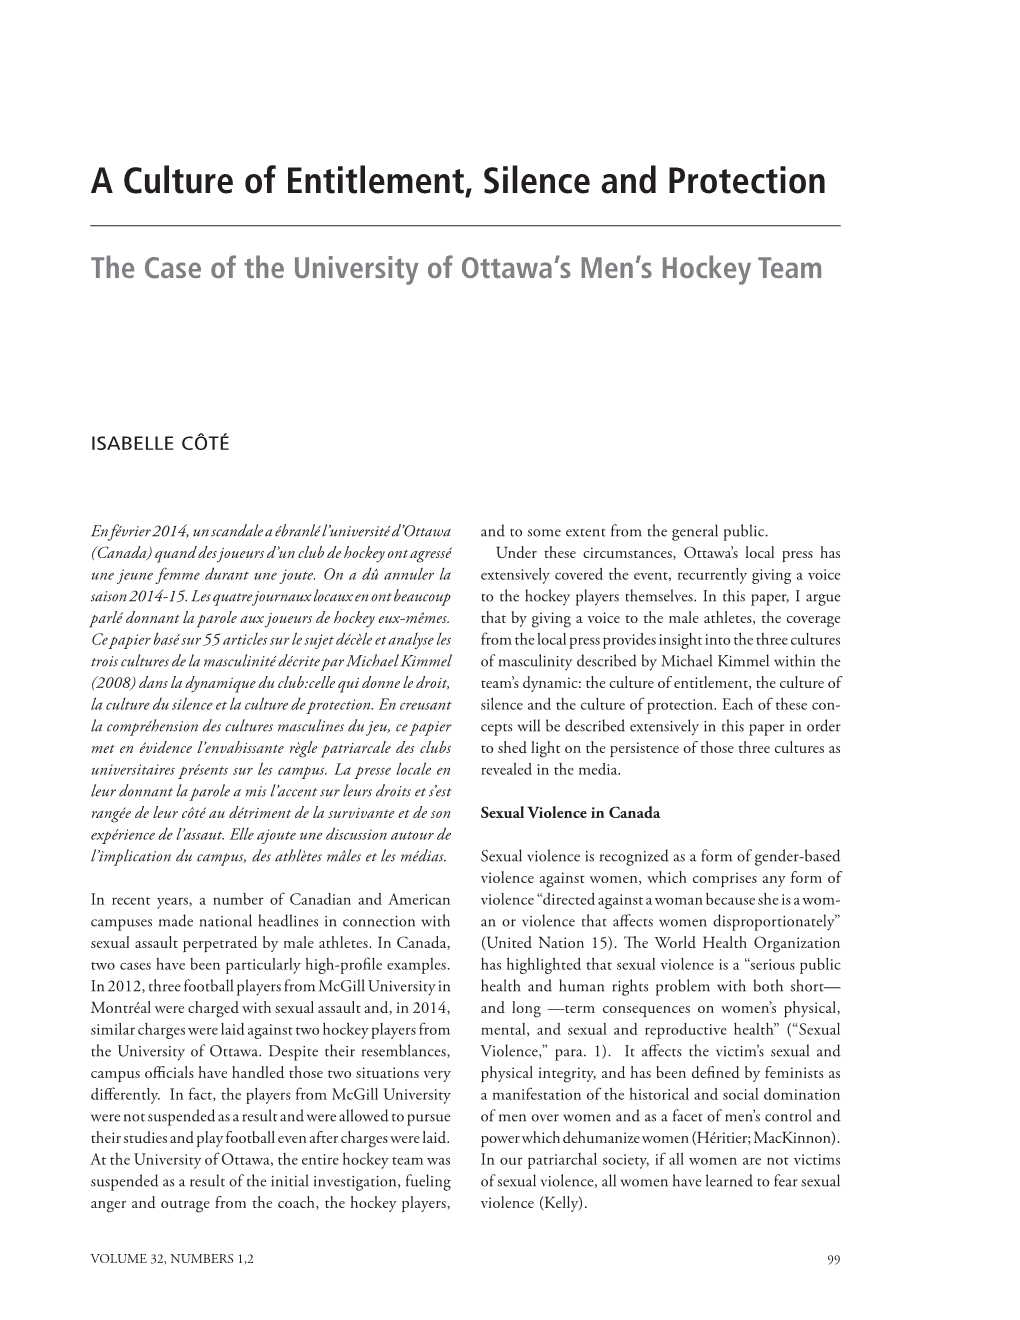 A Culture of Entitlement, Silence and Protection